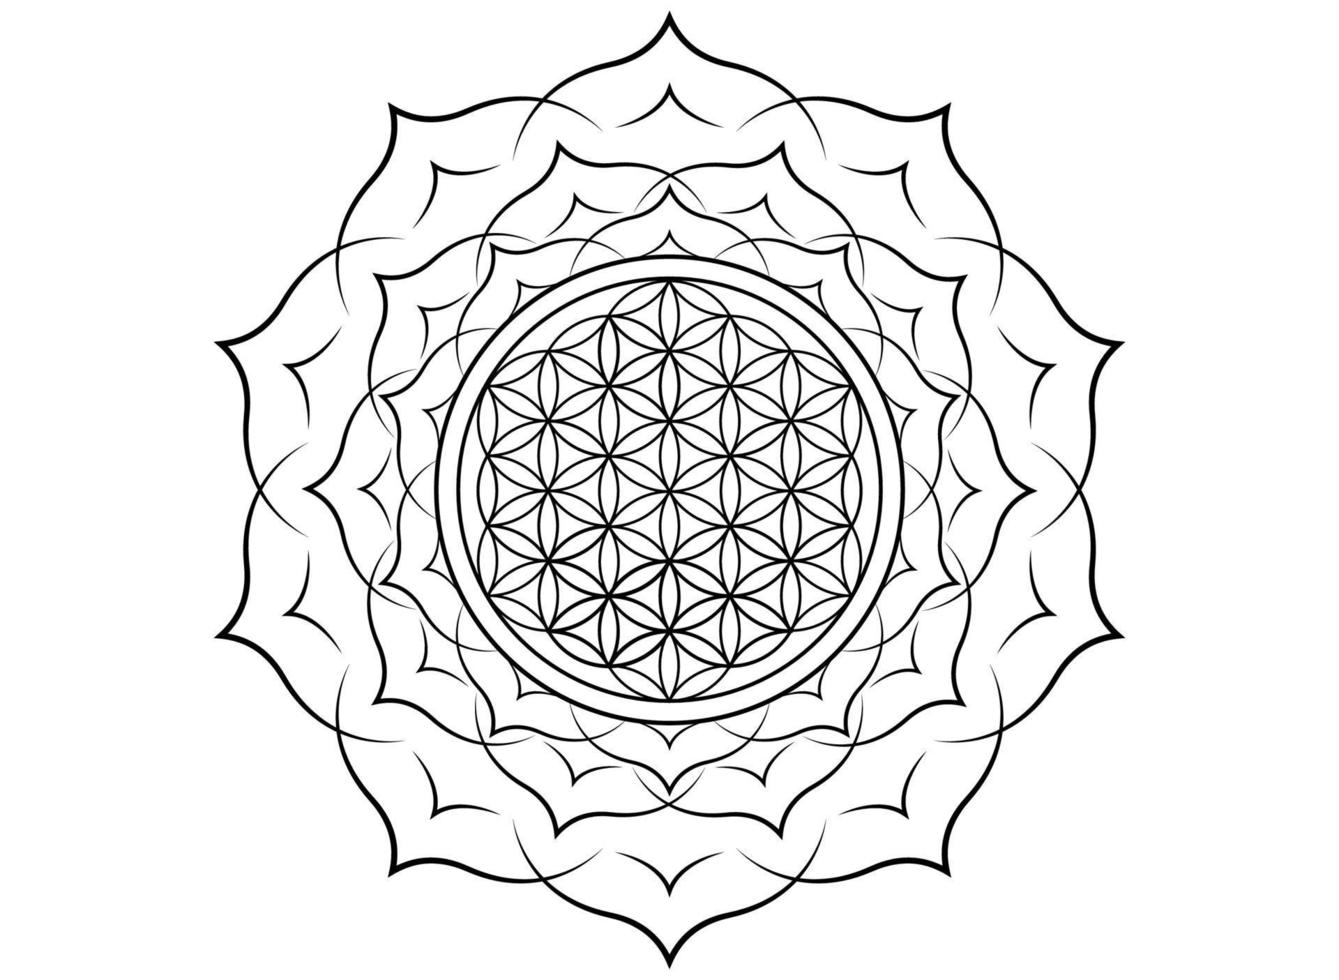 Flower of Life, Yantra Mandala in the lotus flower, Sacred Geometry. Black print tattoo symbol of harmony and balance. Mystical talisman, vector isolated on white background